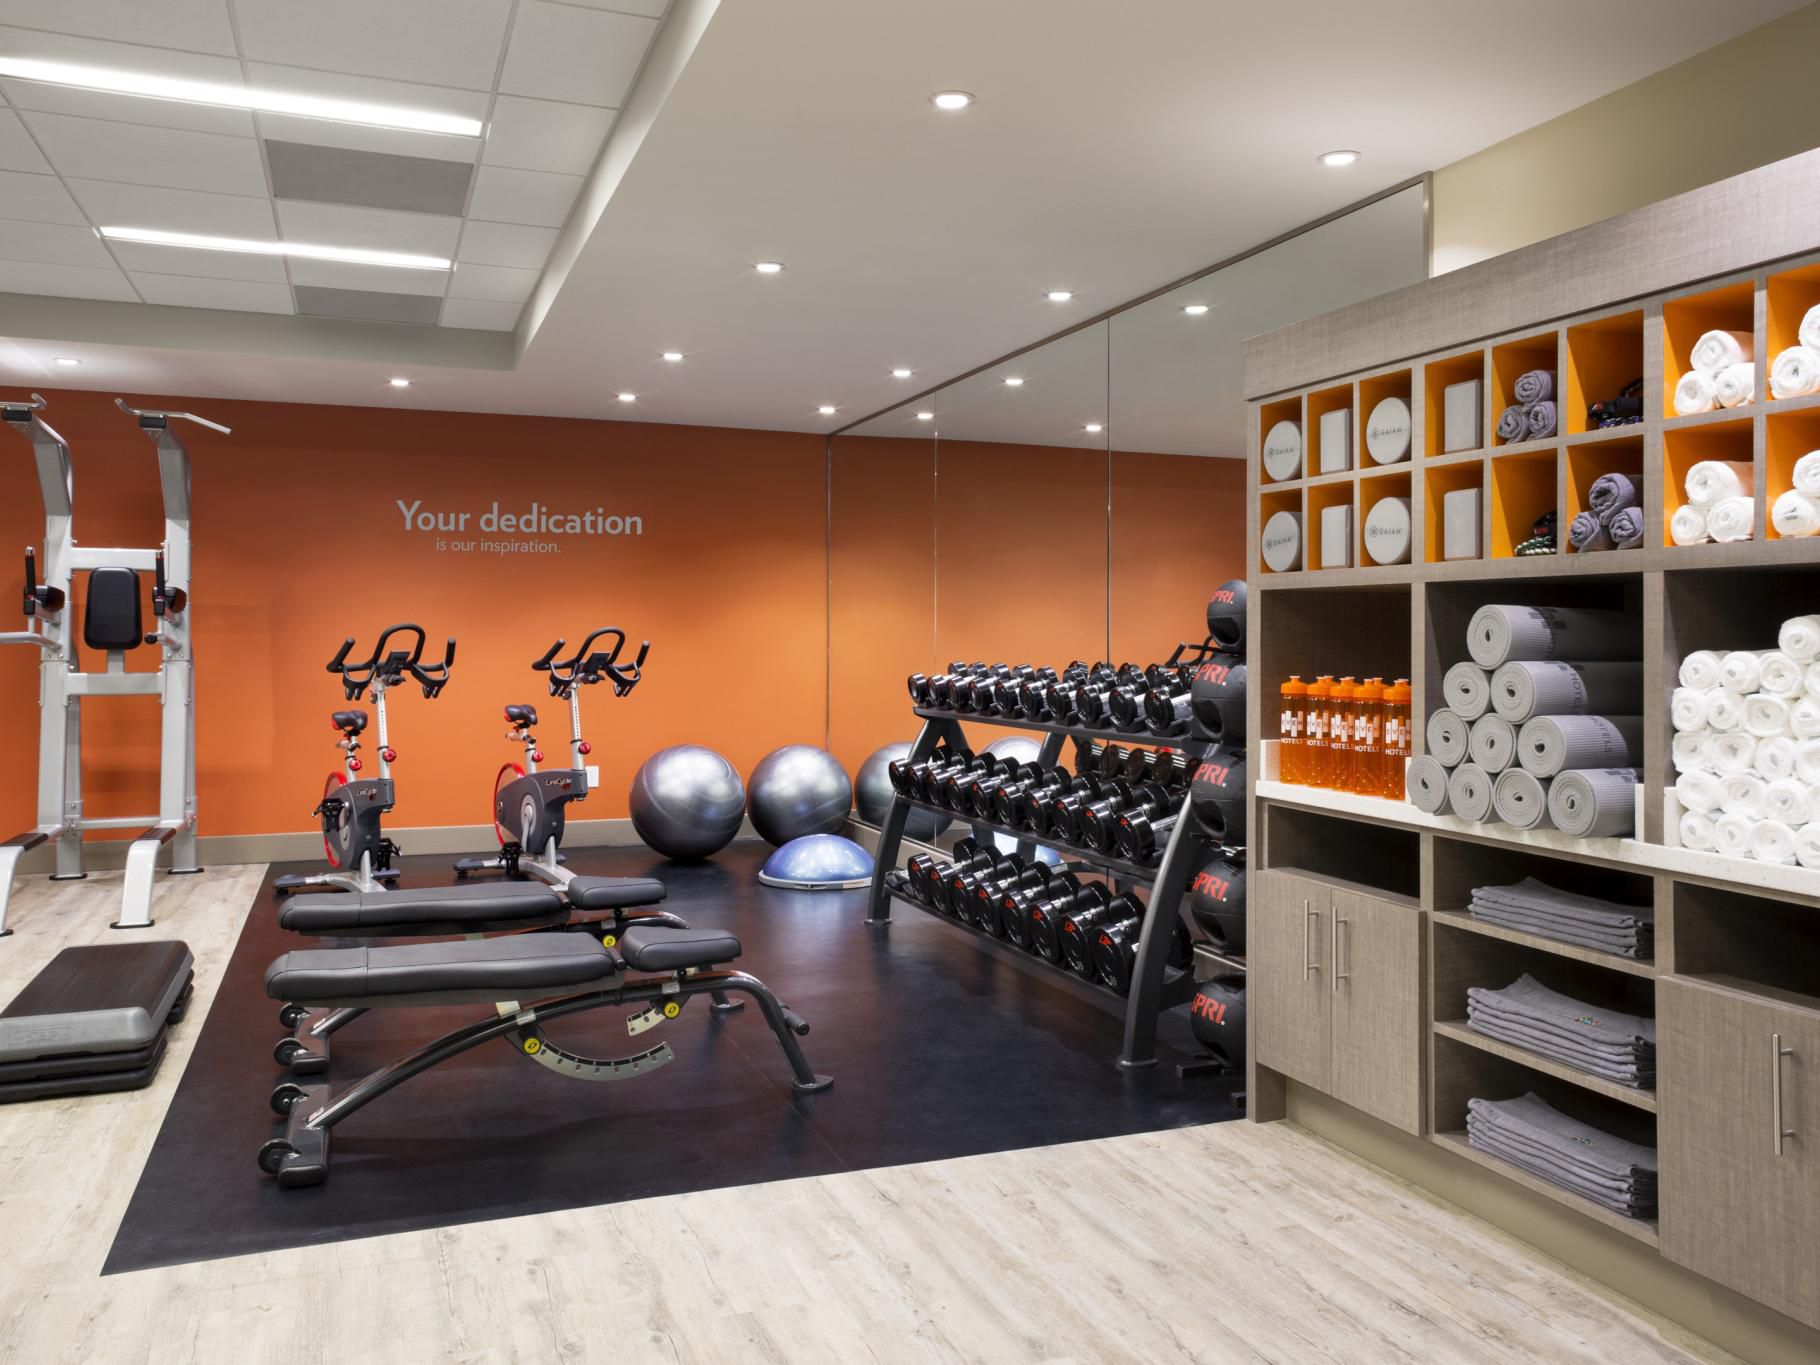 Stay fit at our hotel's onsite Athletic Studio, which is open 24/7 and equipped with countless state-of-the-art machines for full-body workouts, as well as on-demand training videos for in-room workouts. Each hotel room offers fitness equipment so you can maintain your routine with ease.
